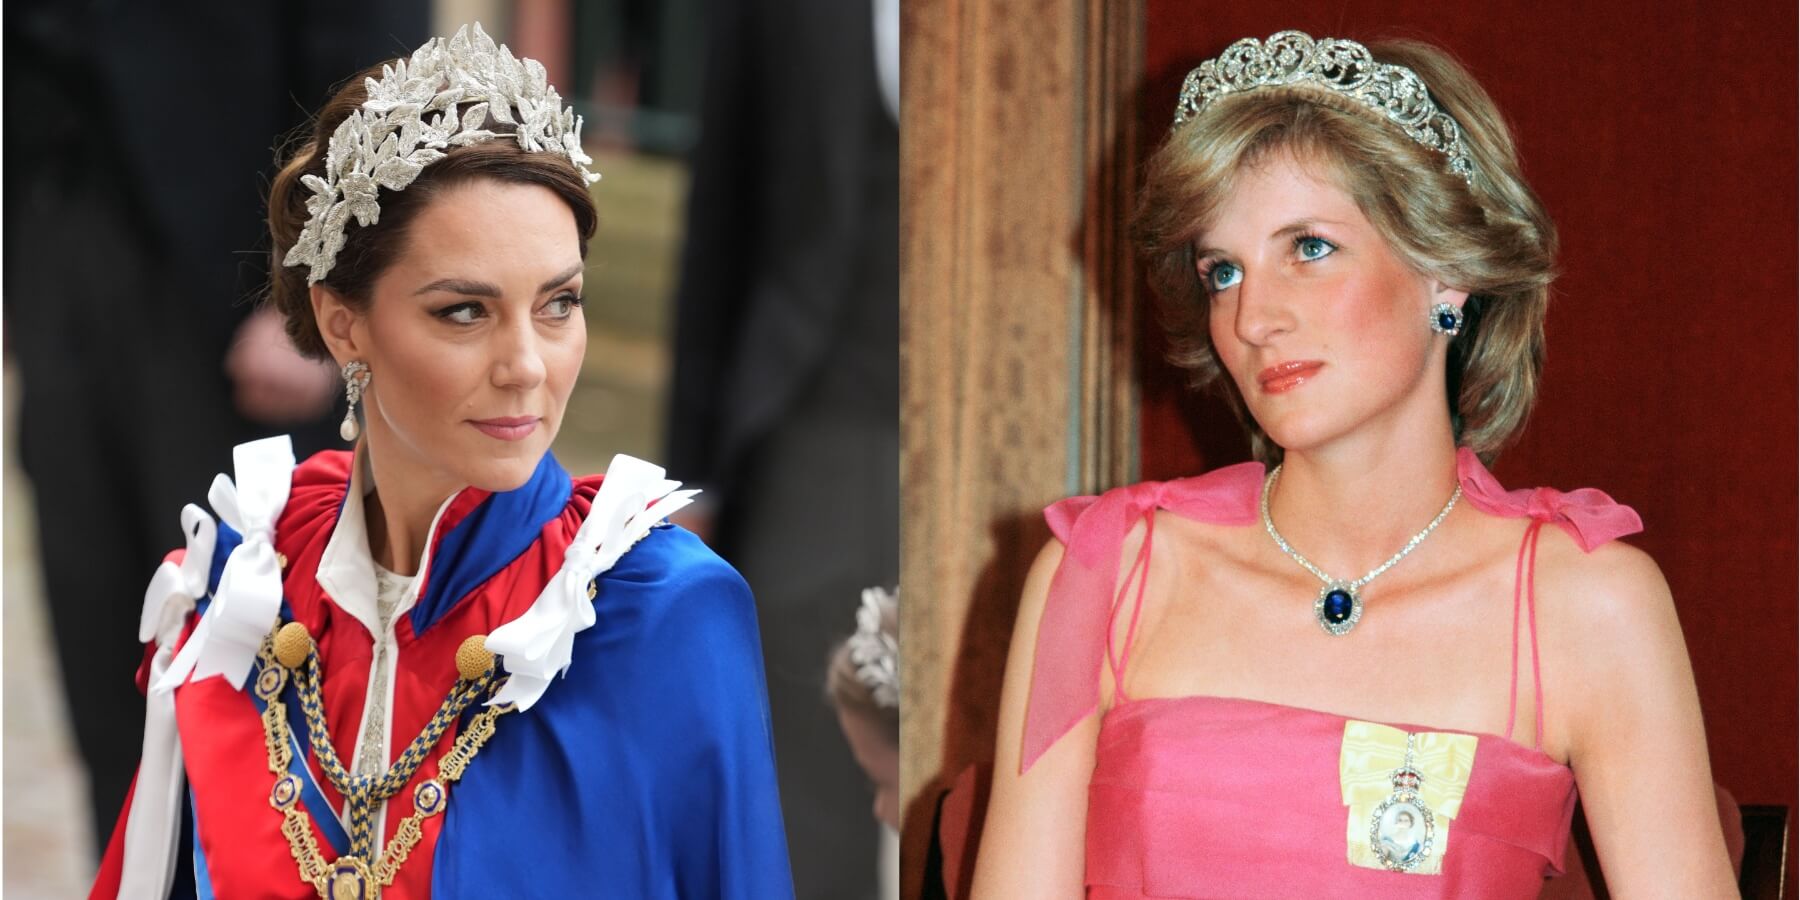 Kate Middleton and Princess Diana in side-by-side photographs.